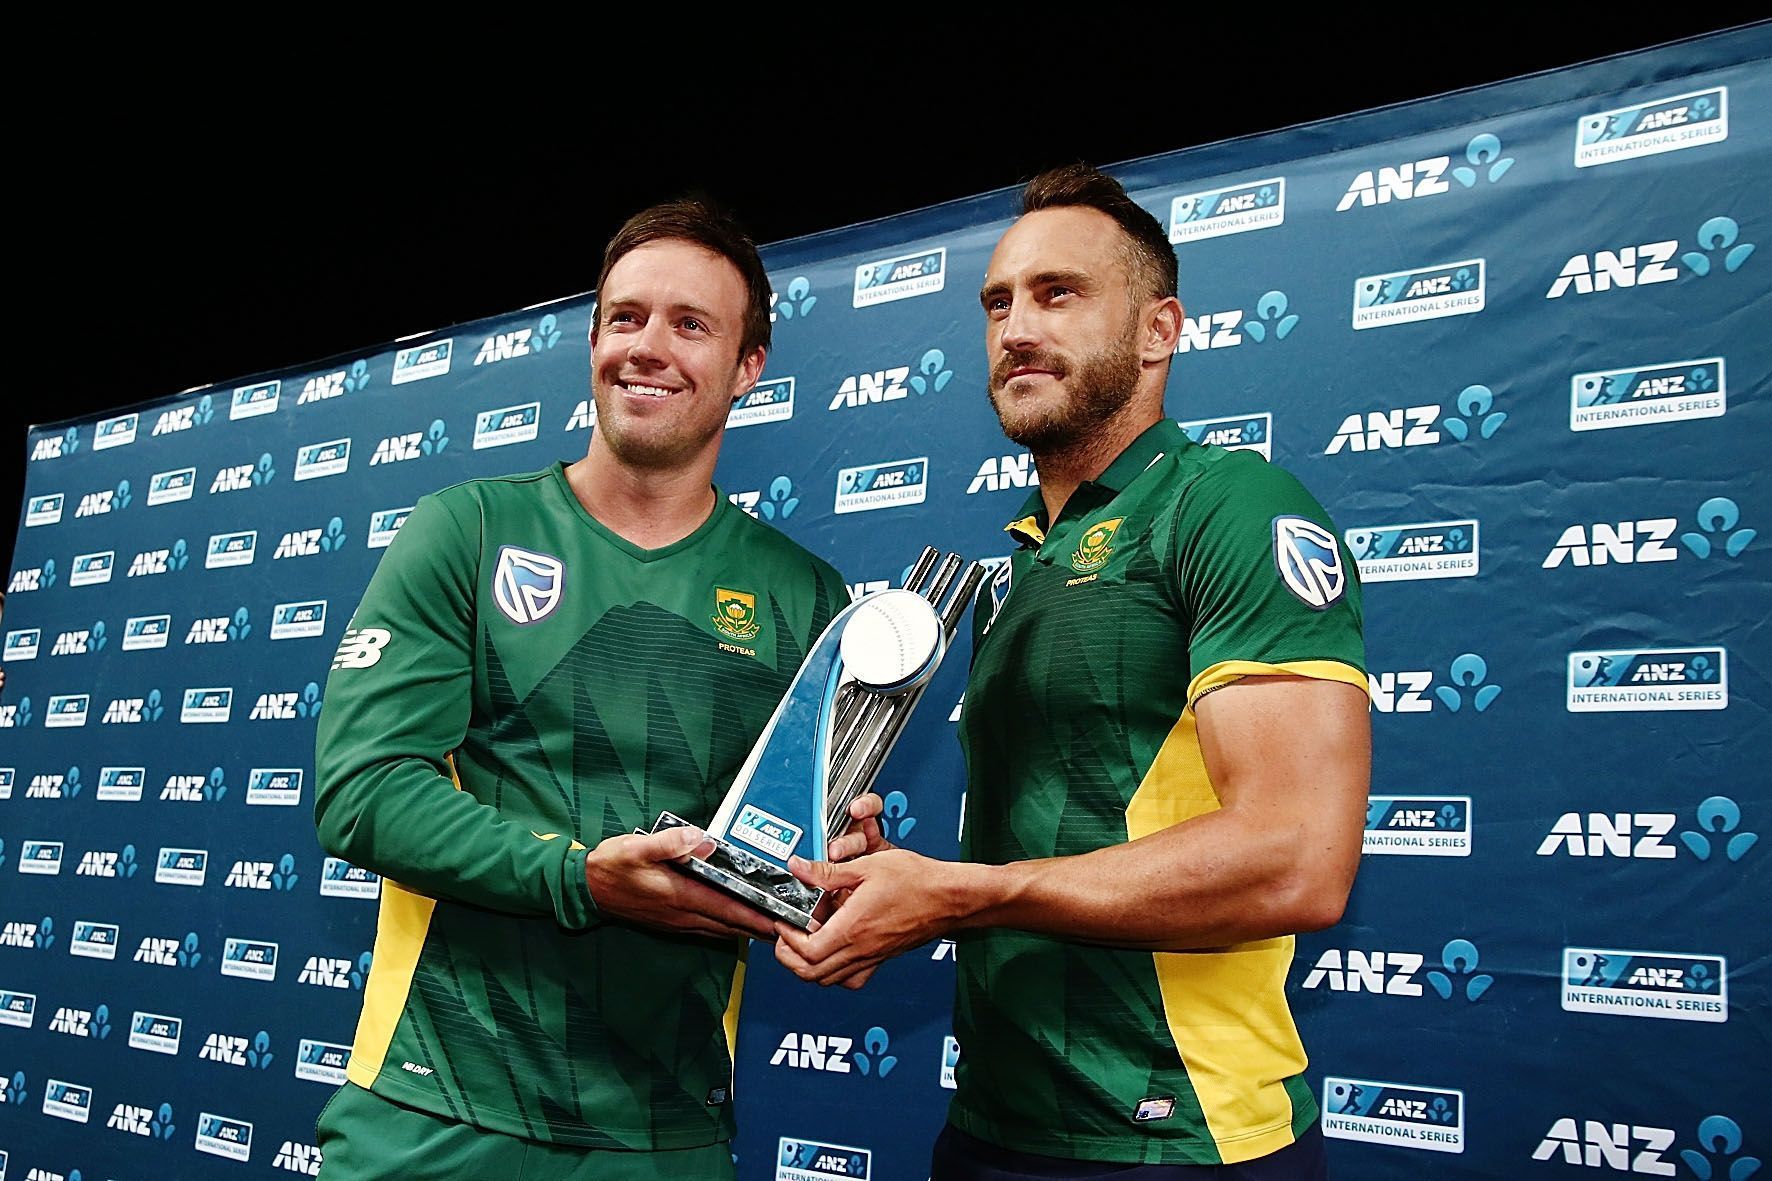 AB de Villiers and Faf du Plessis have been to standout South African players in the IPL